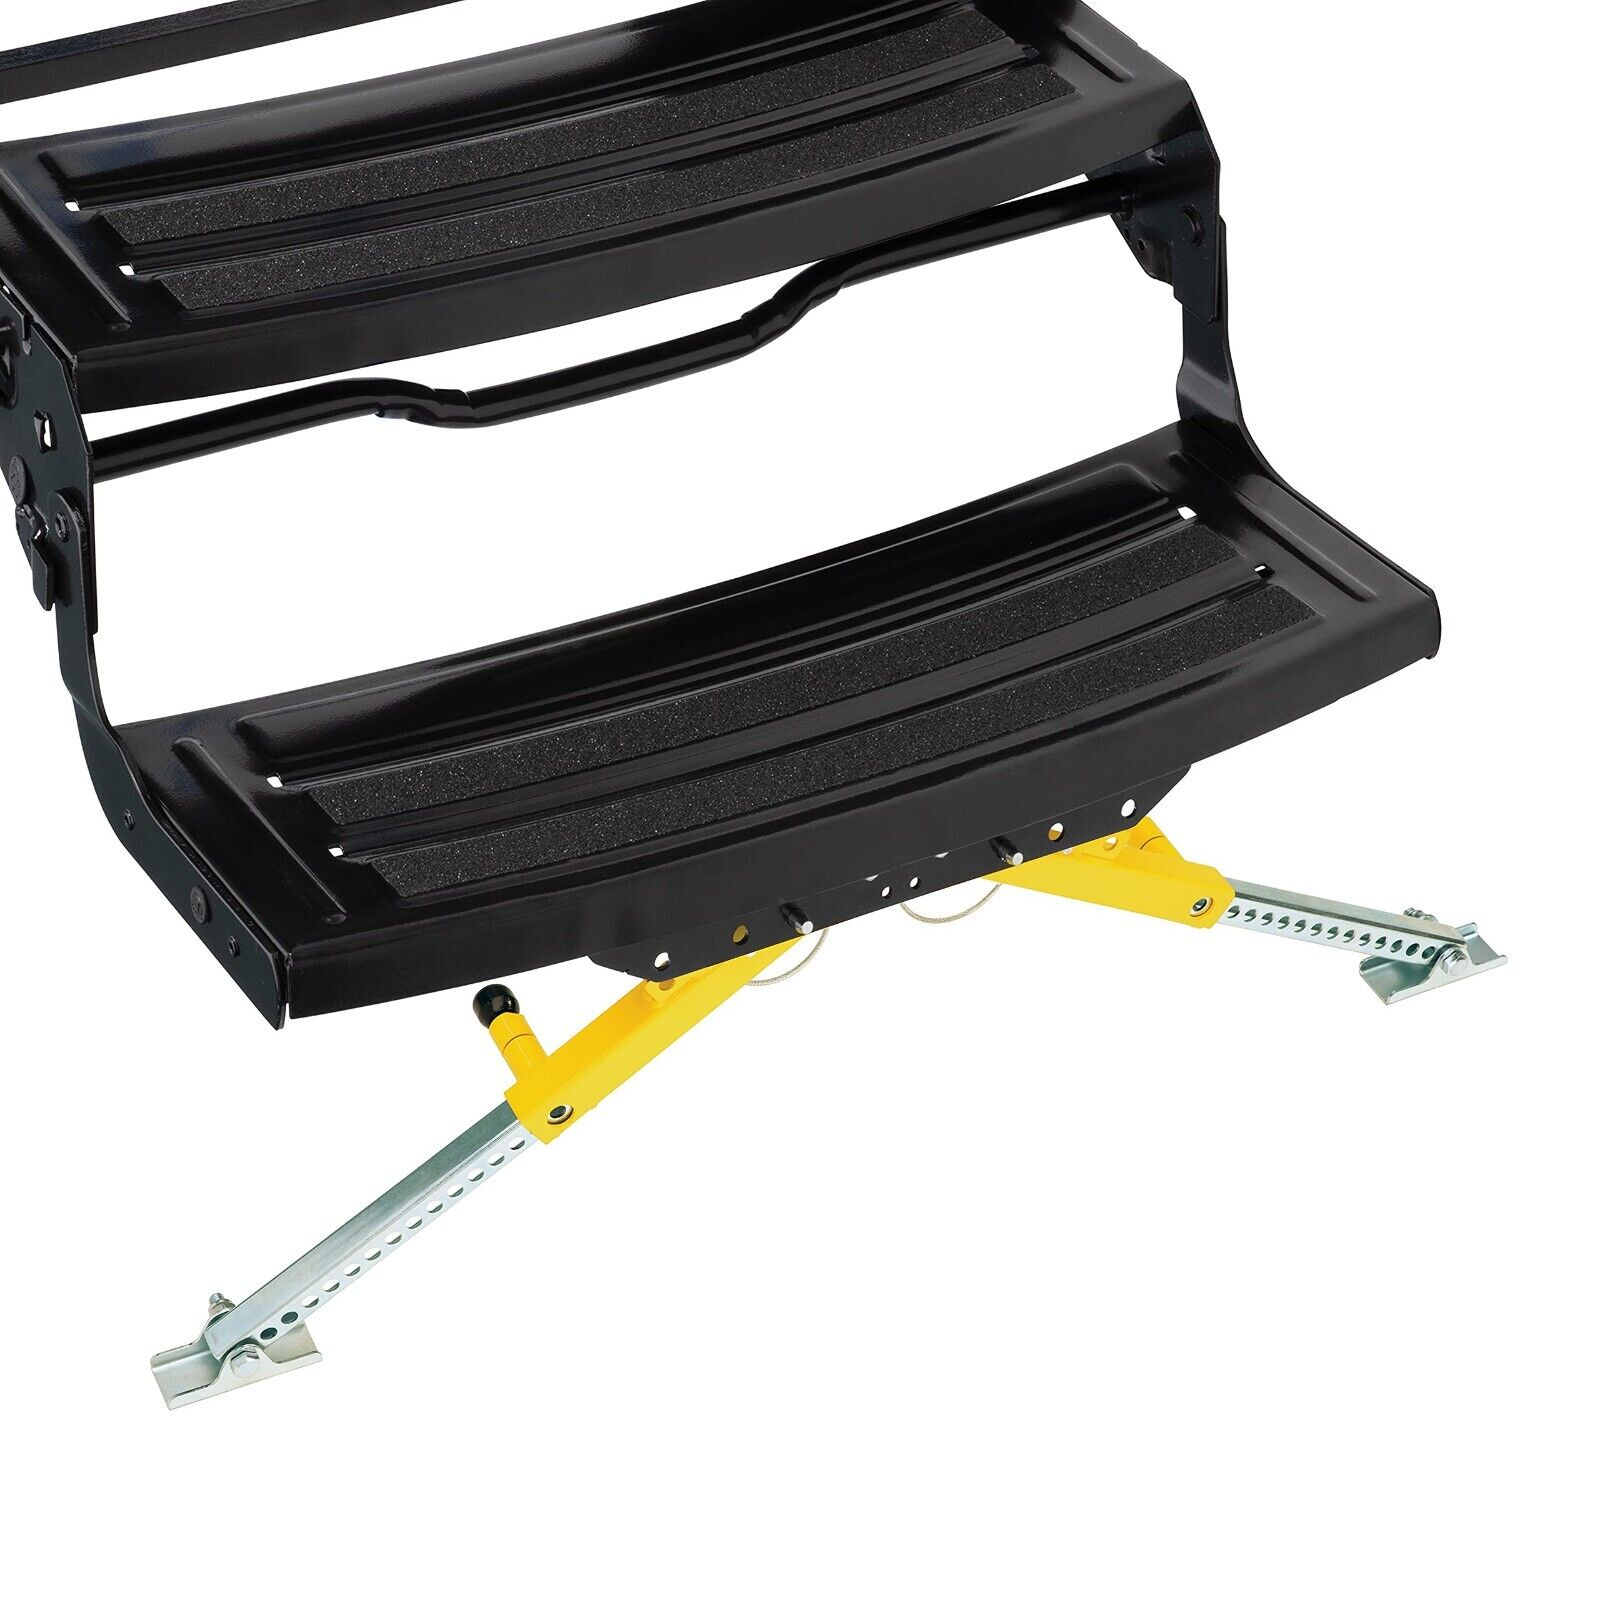 Lippert Solid Stance RV Step Stabilizer Kit for 5th Wheels, Travel Trailers and